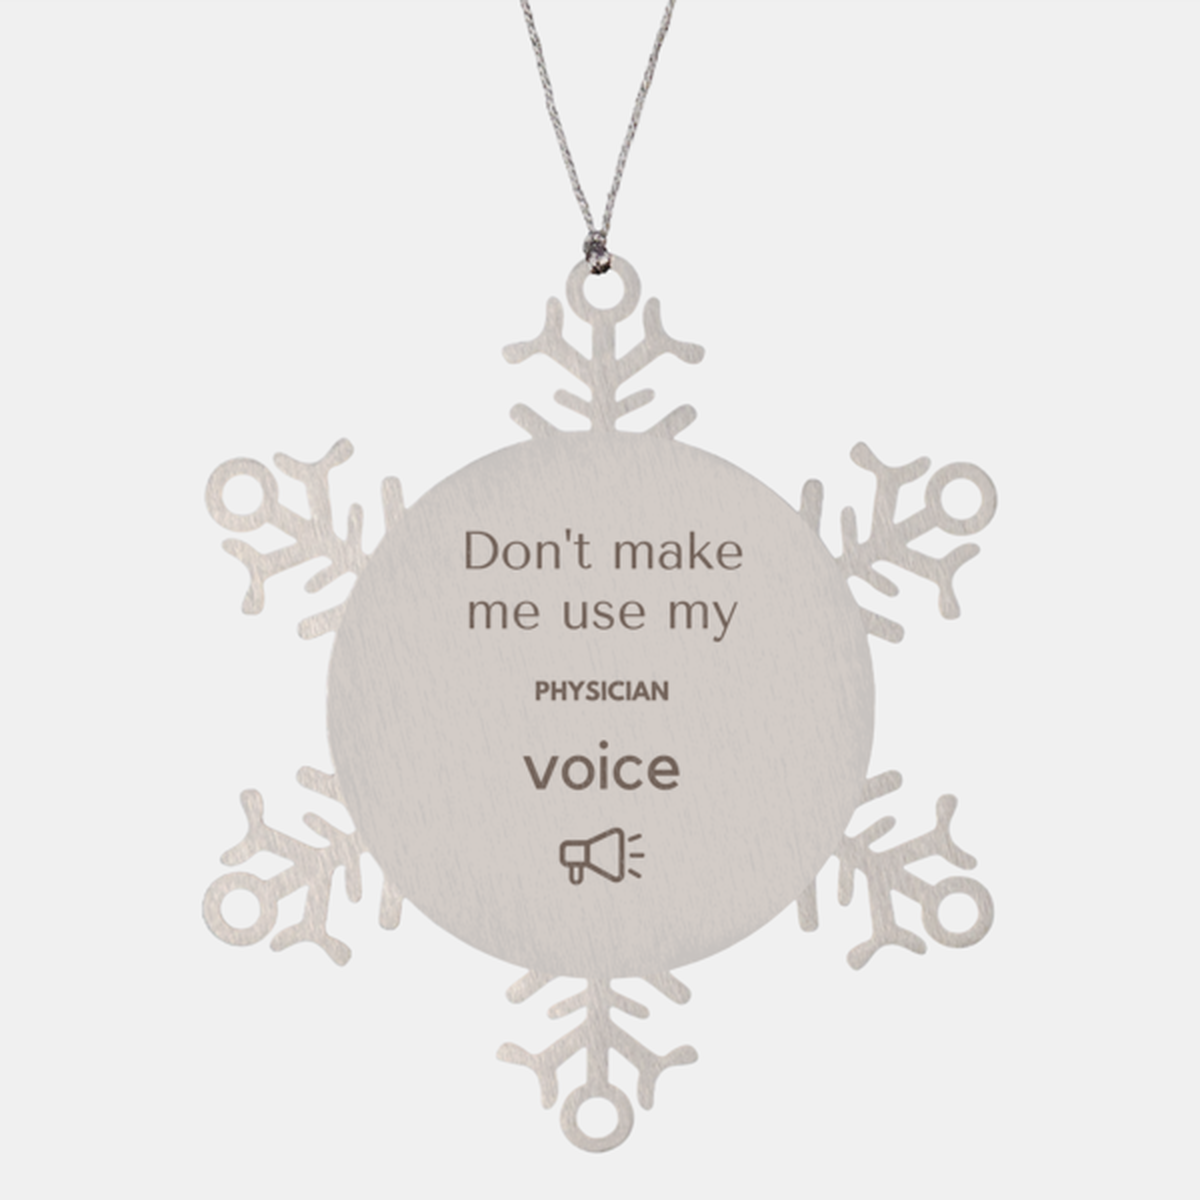 Don't make me use my Physician voice, Sarcasm Physician Ornament Gifts, Christmas Physician Snowflake Ornament Unique Gifts For Physician Coworkers, Men, Women, Colleague, Friends